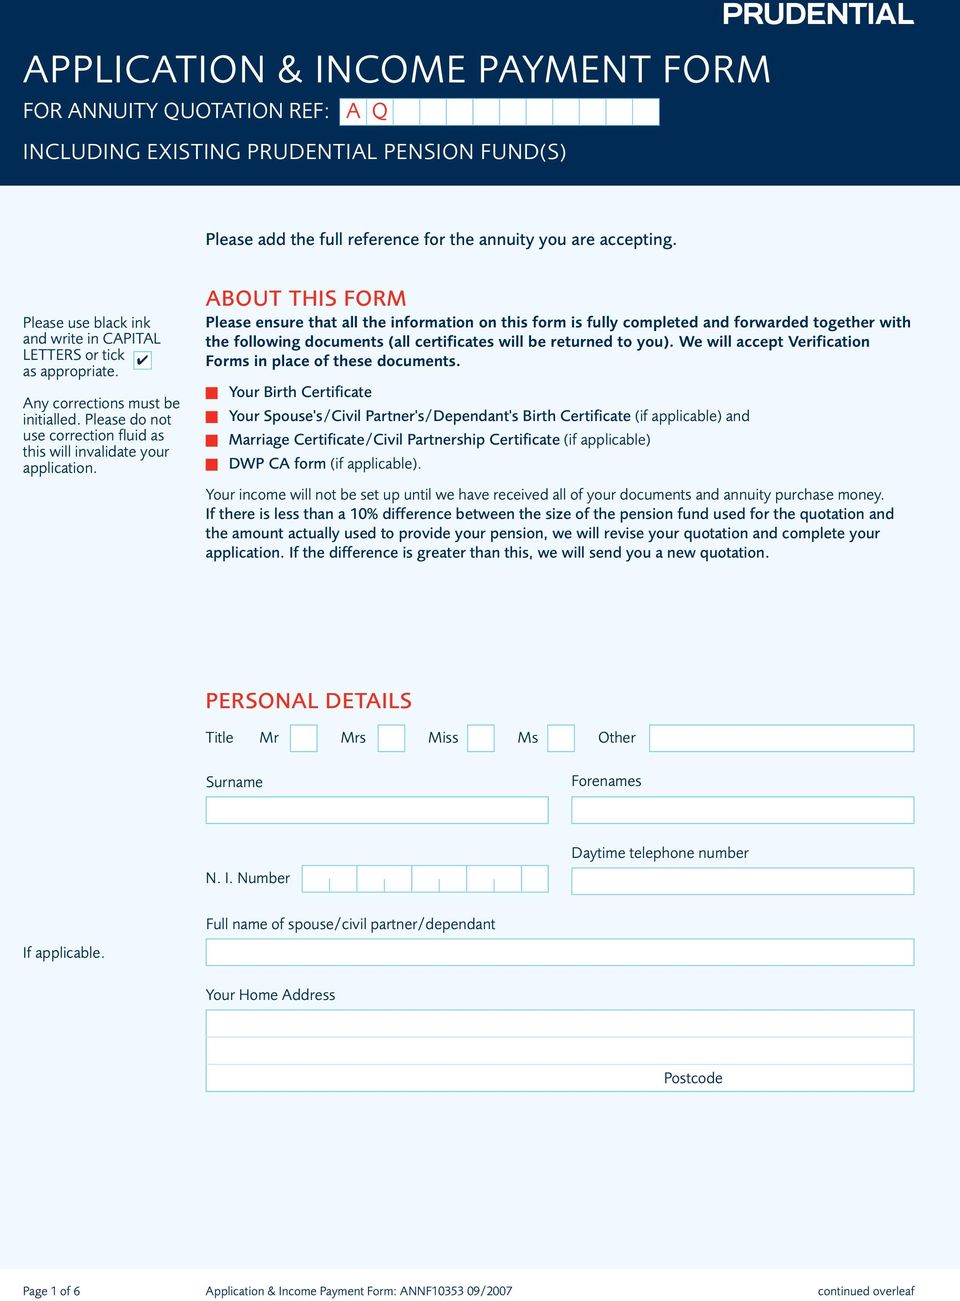 ABOUT THIS FORM Please ensure that all the information on this form is fully completed and forwarded together with the following documents (all certificates will be returned to you).